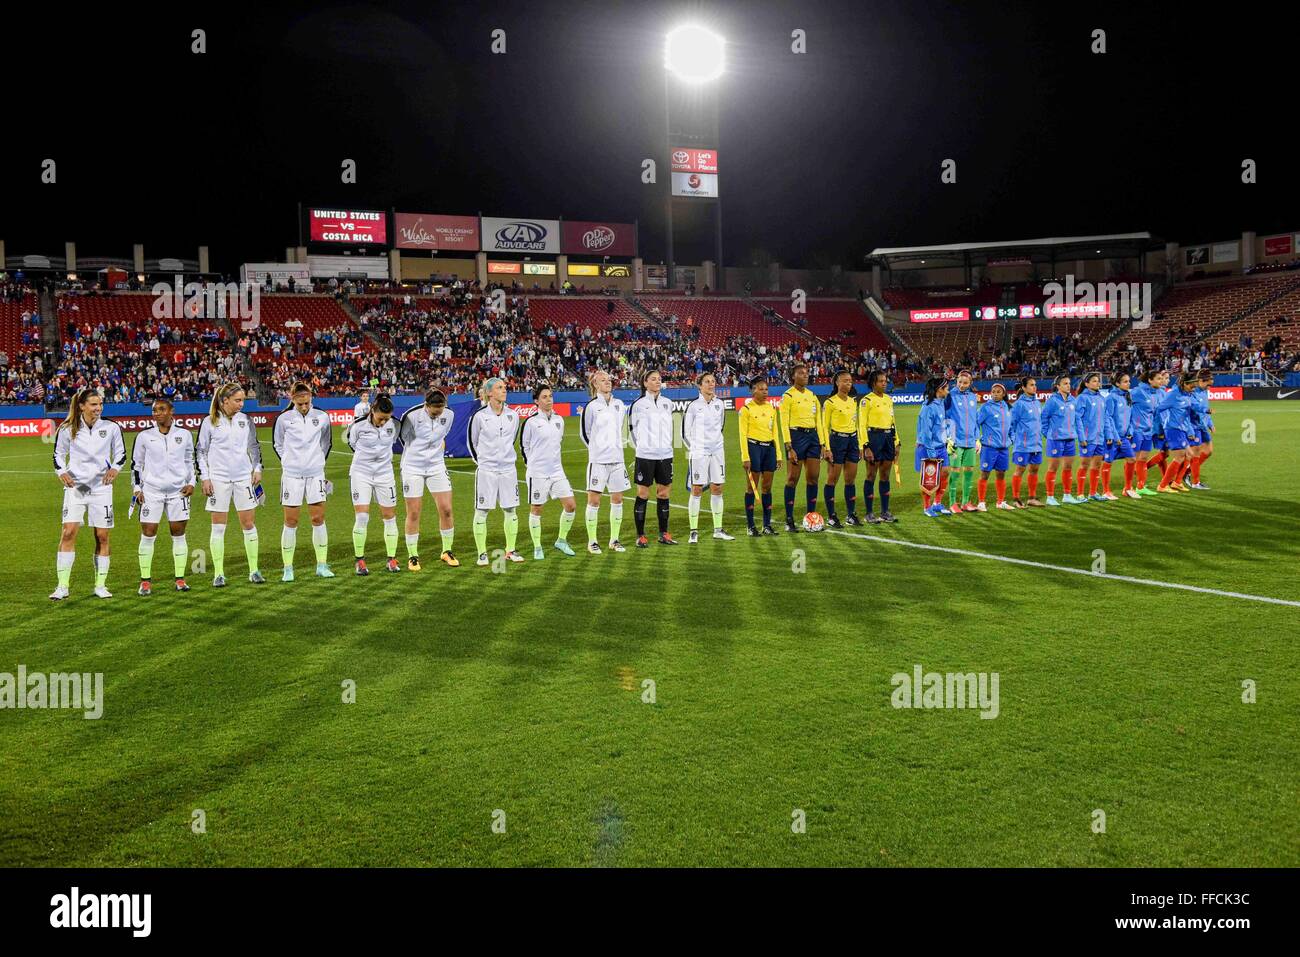 Team USA and Team Costa Rica before the 2016 CONCACAF Women's Olympic Qualifiers between Costa Rica and USA Soccer team, Wednesday Feb. 10th, 2016 at Toyota Stadium in Frisco, Texas.USA wins 5-0.(Manny Flores/Cal Sport Media) © Cal Sport Media/Alamy Live News Stock Photo